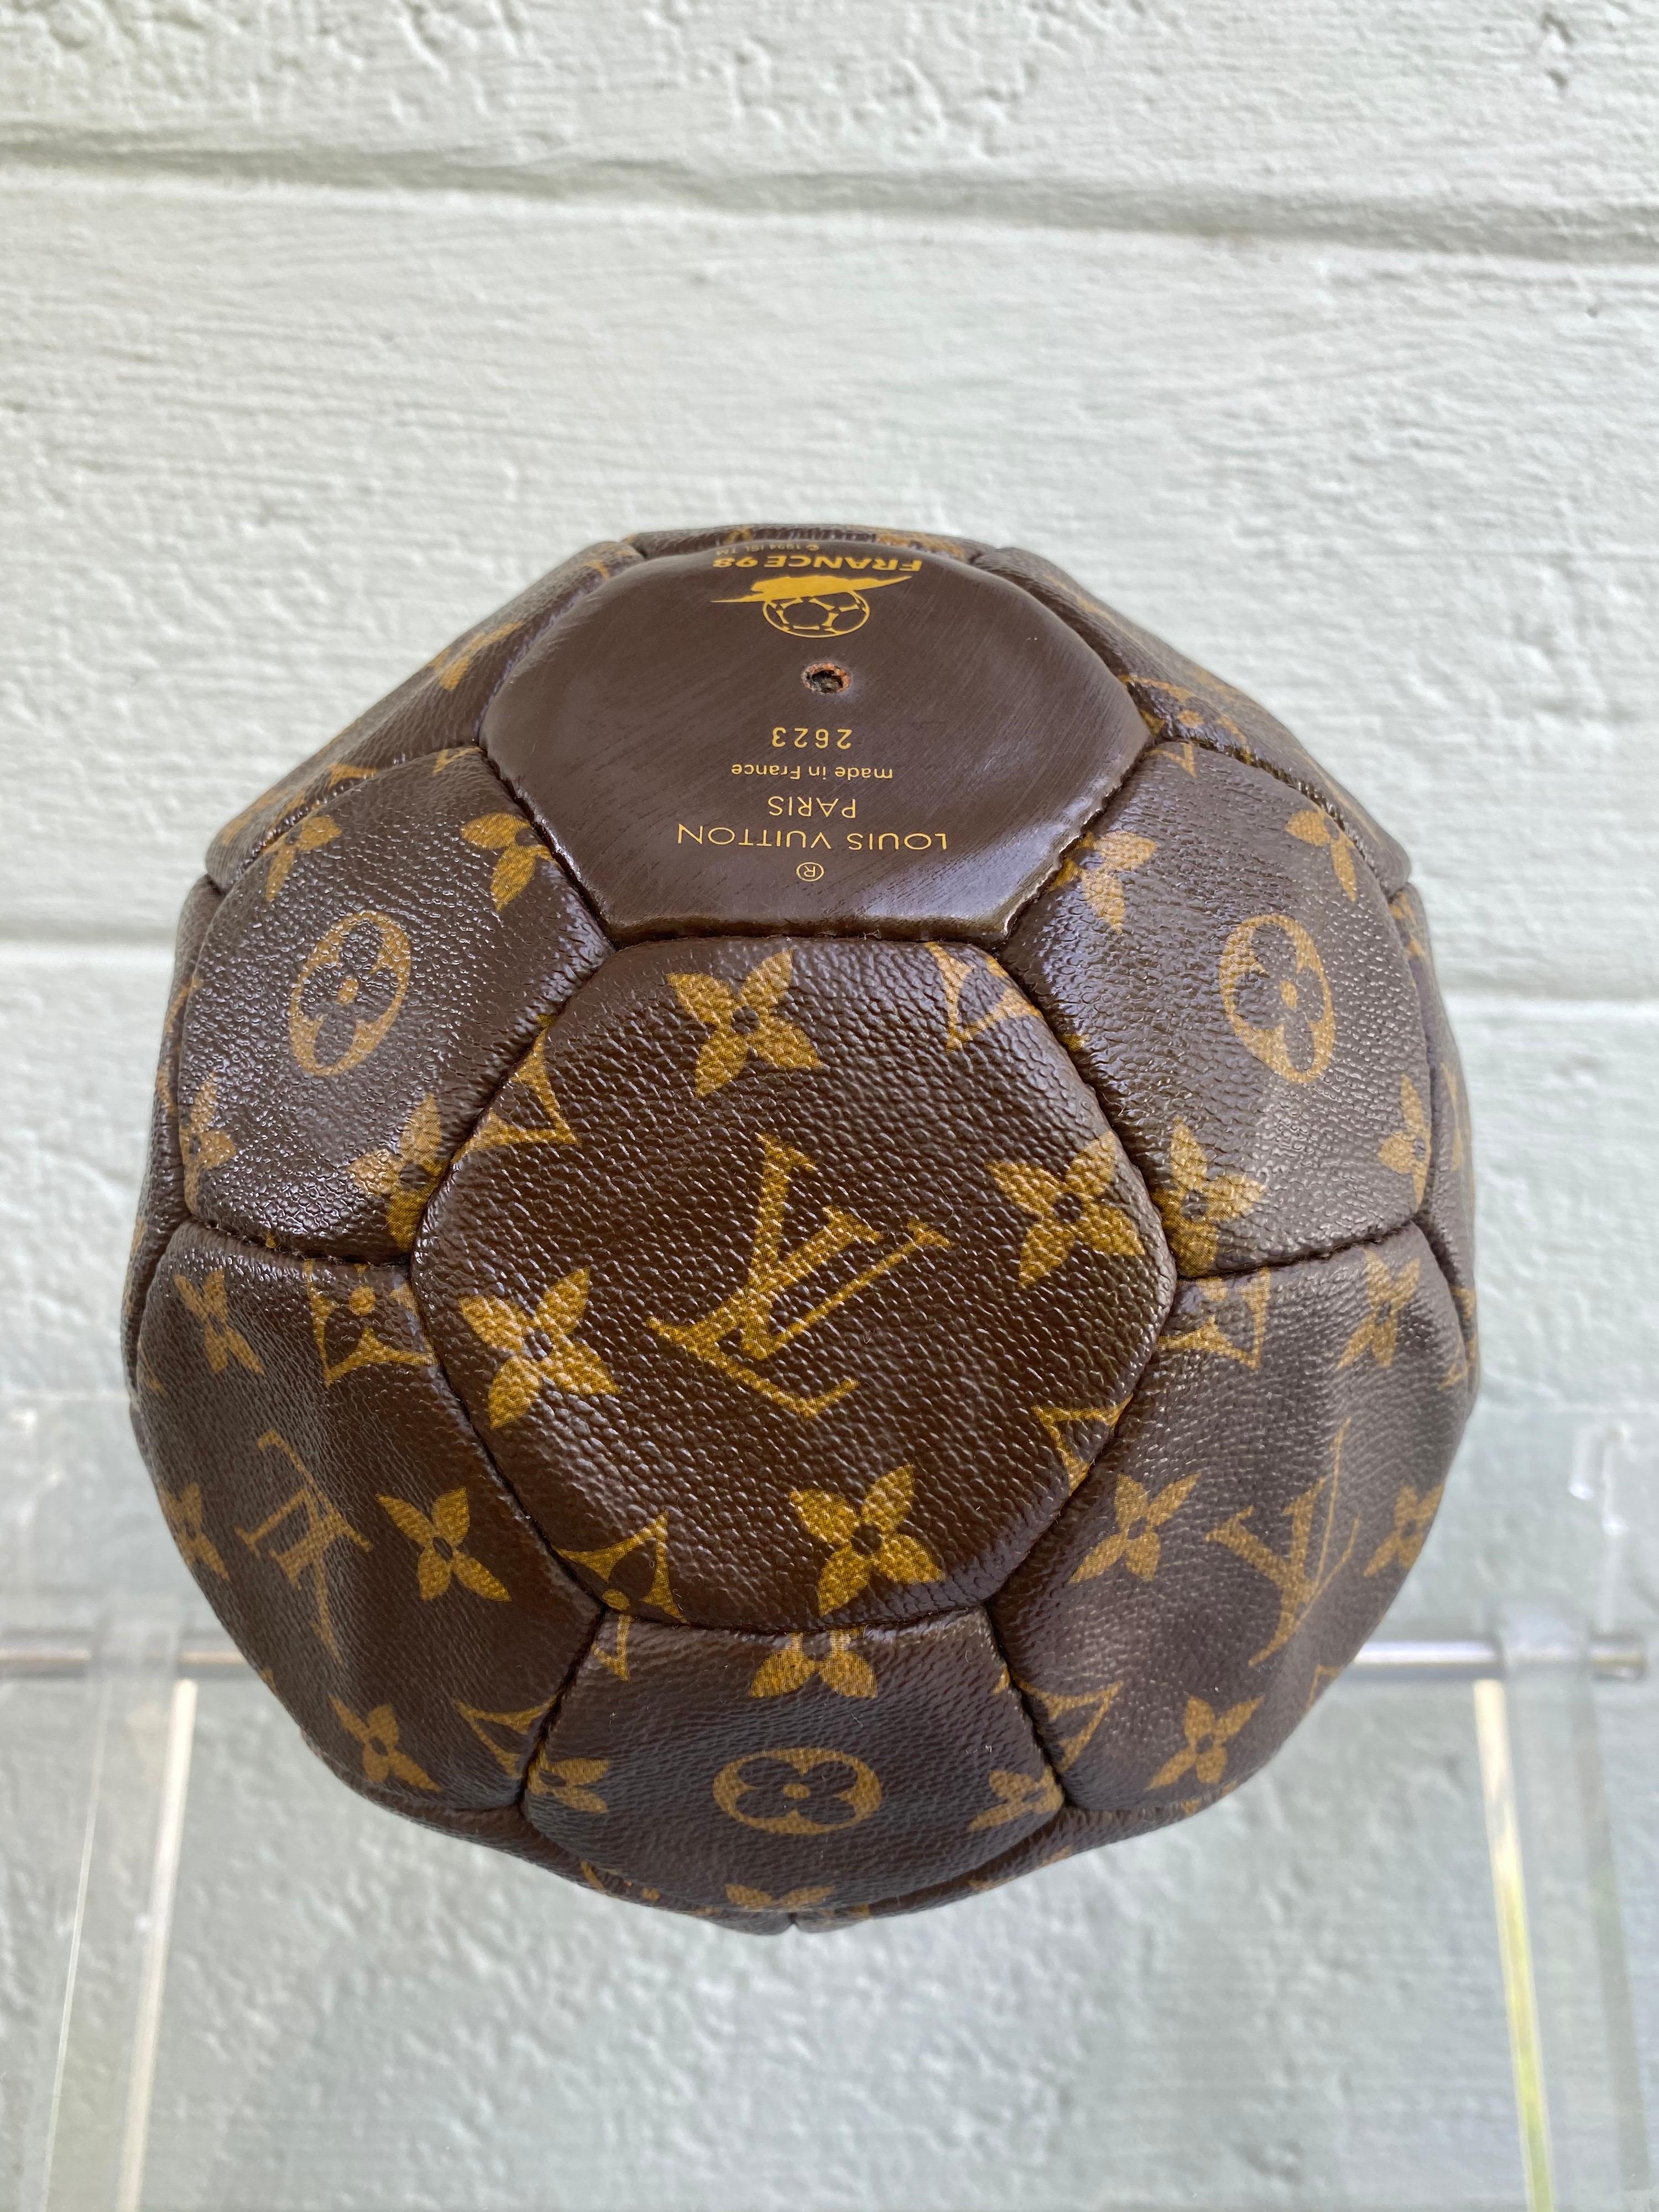 Women's or Men's Louis Vuitton Monogram World Cup Limited Edition Soccer Ball